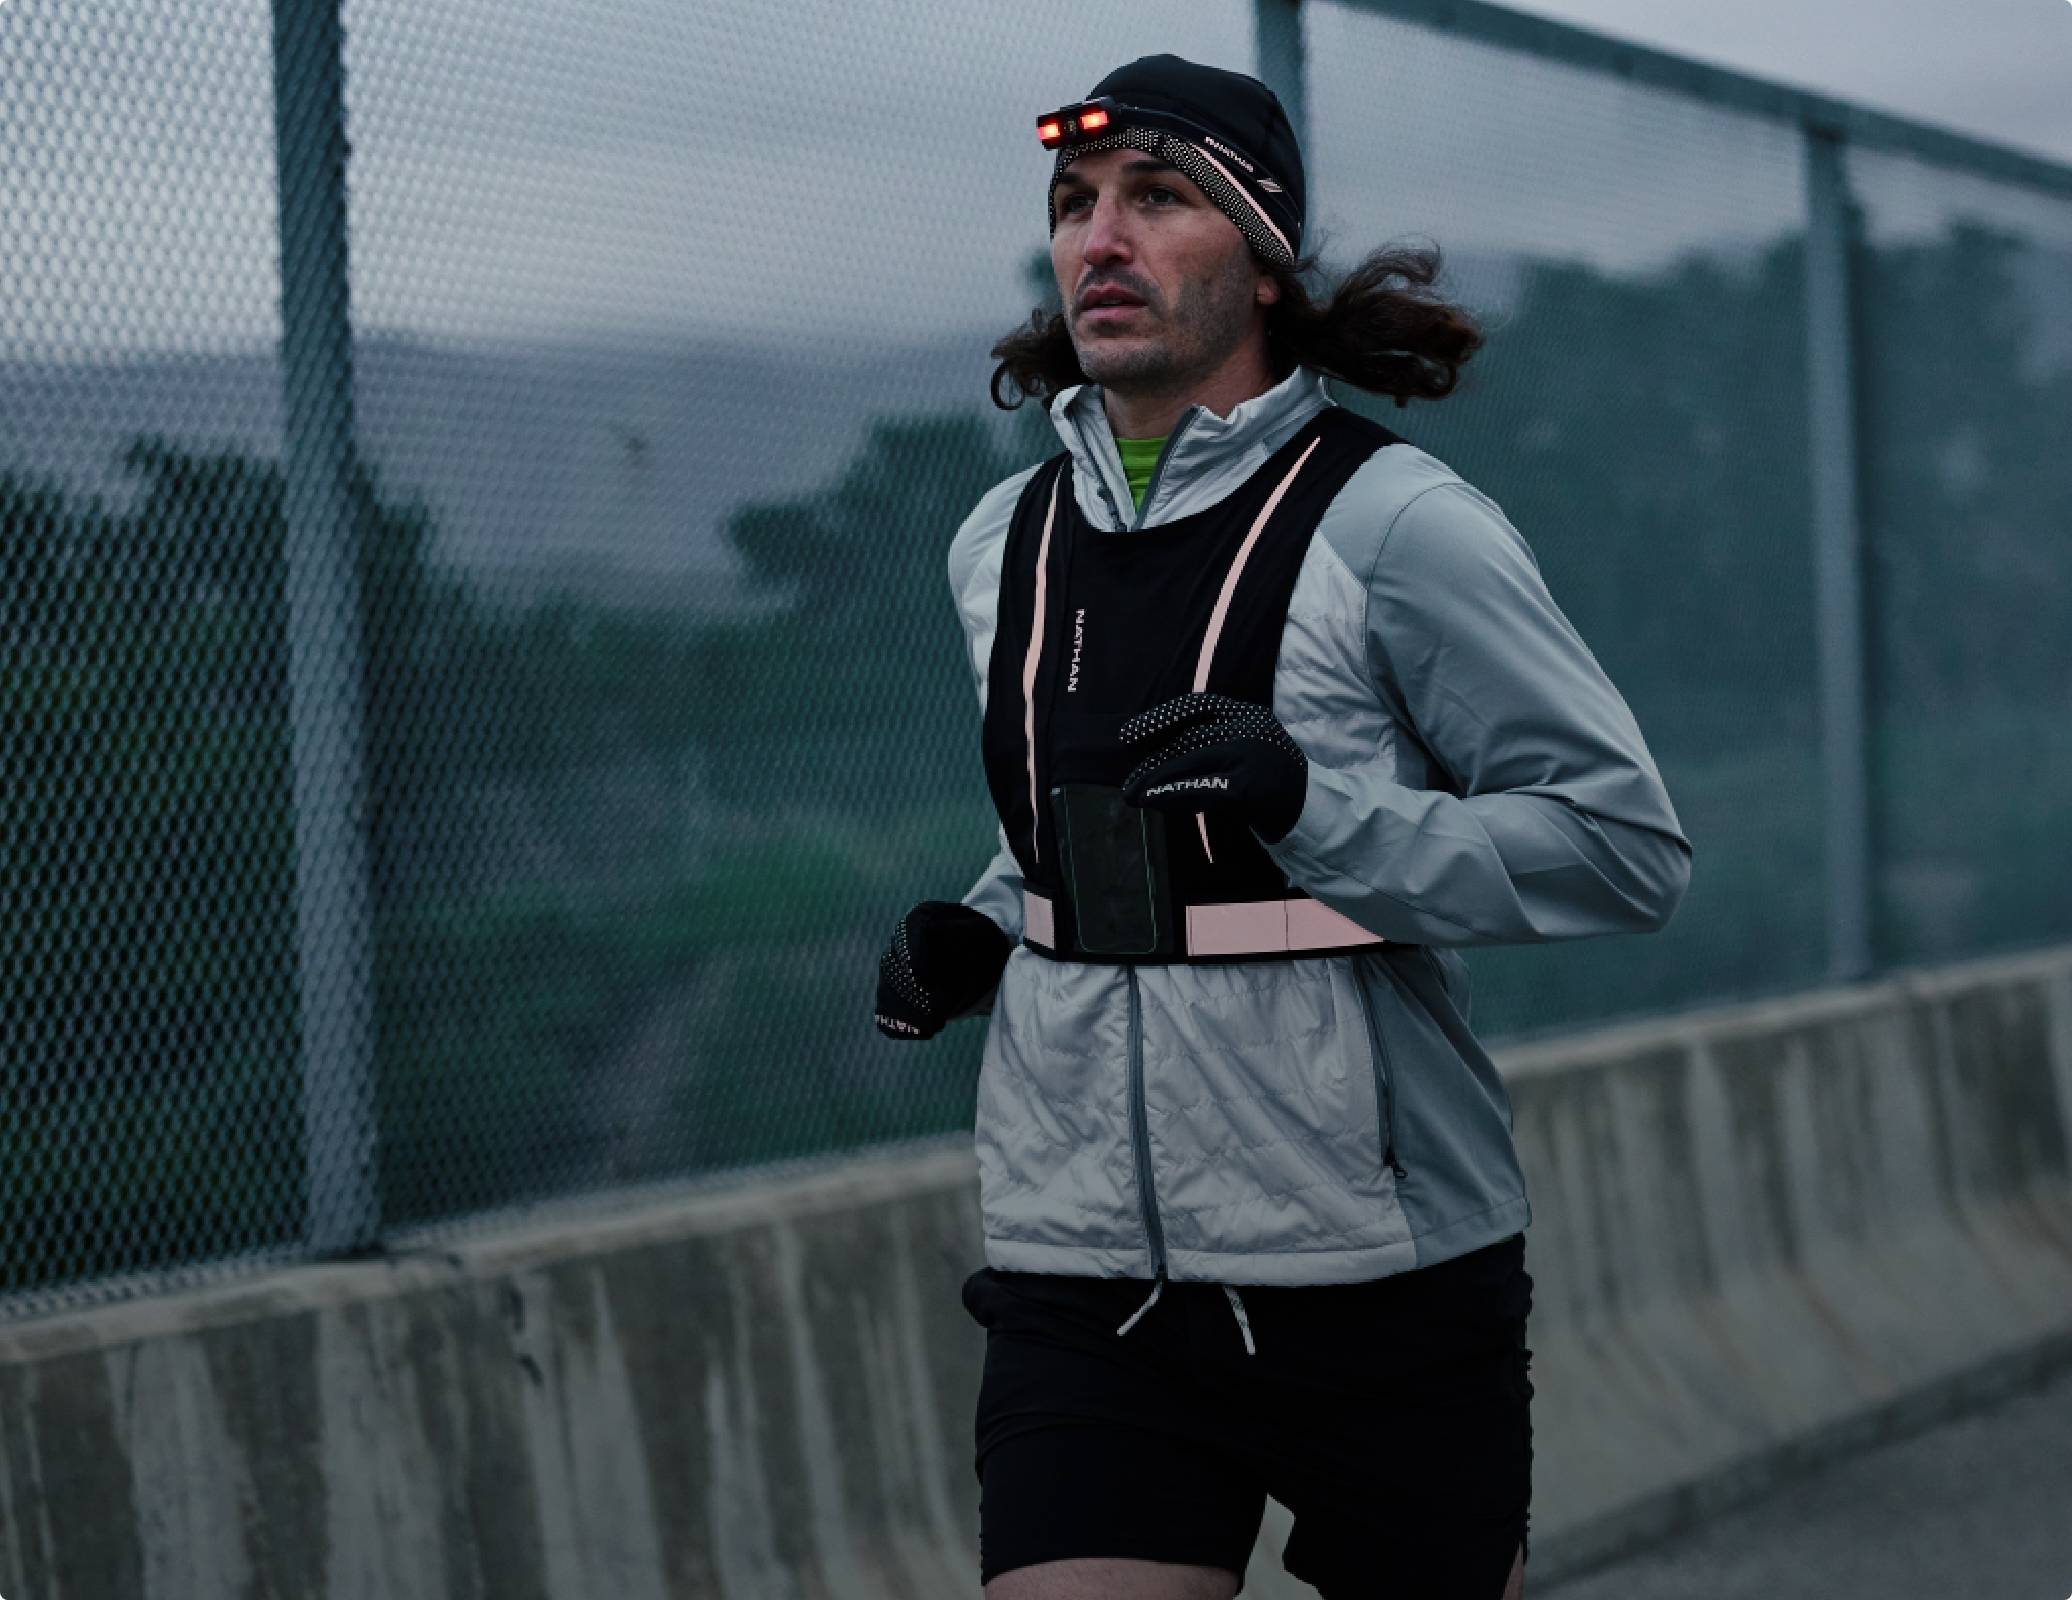 Male road running in an early morning setting while wearing Nathan safety gear